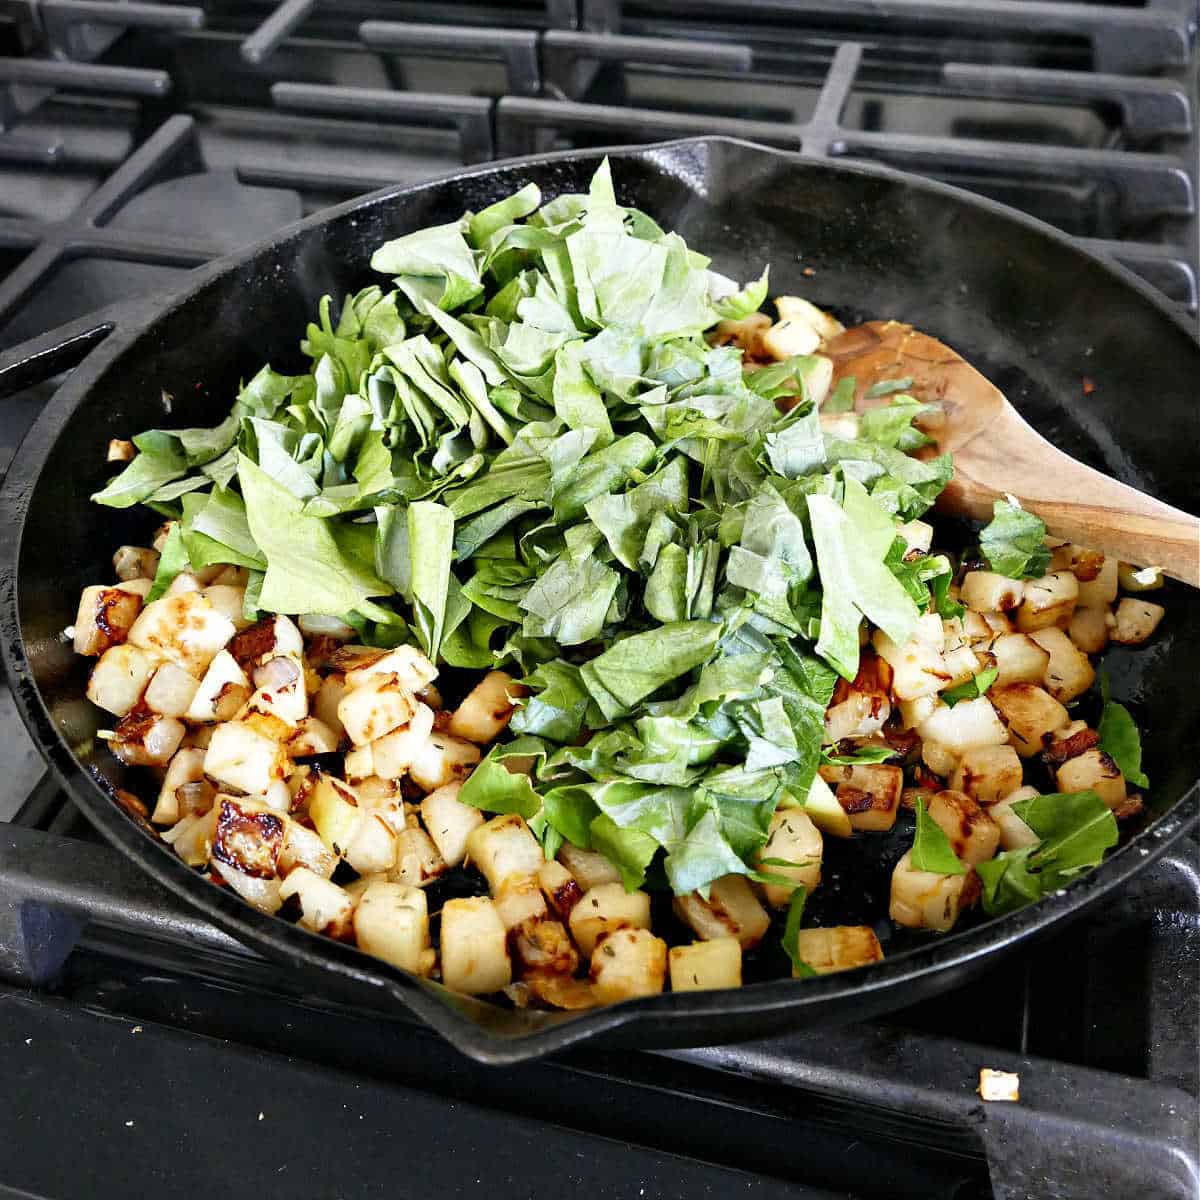 sautéed kohlrabi cooking in a cast iron skillet with the leaves being added